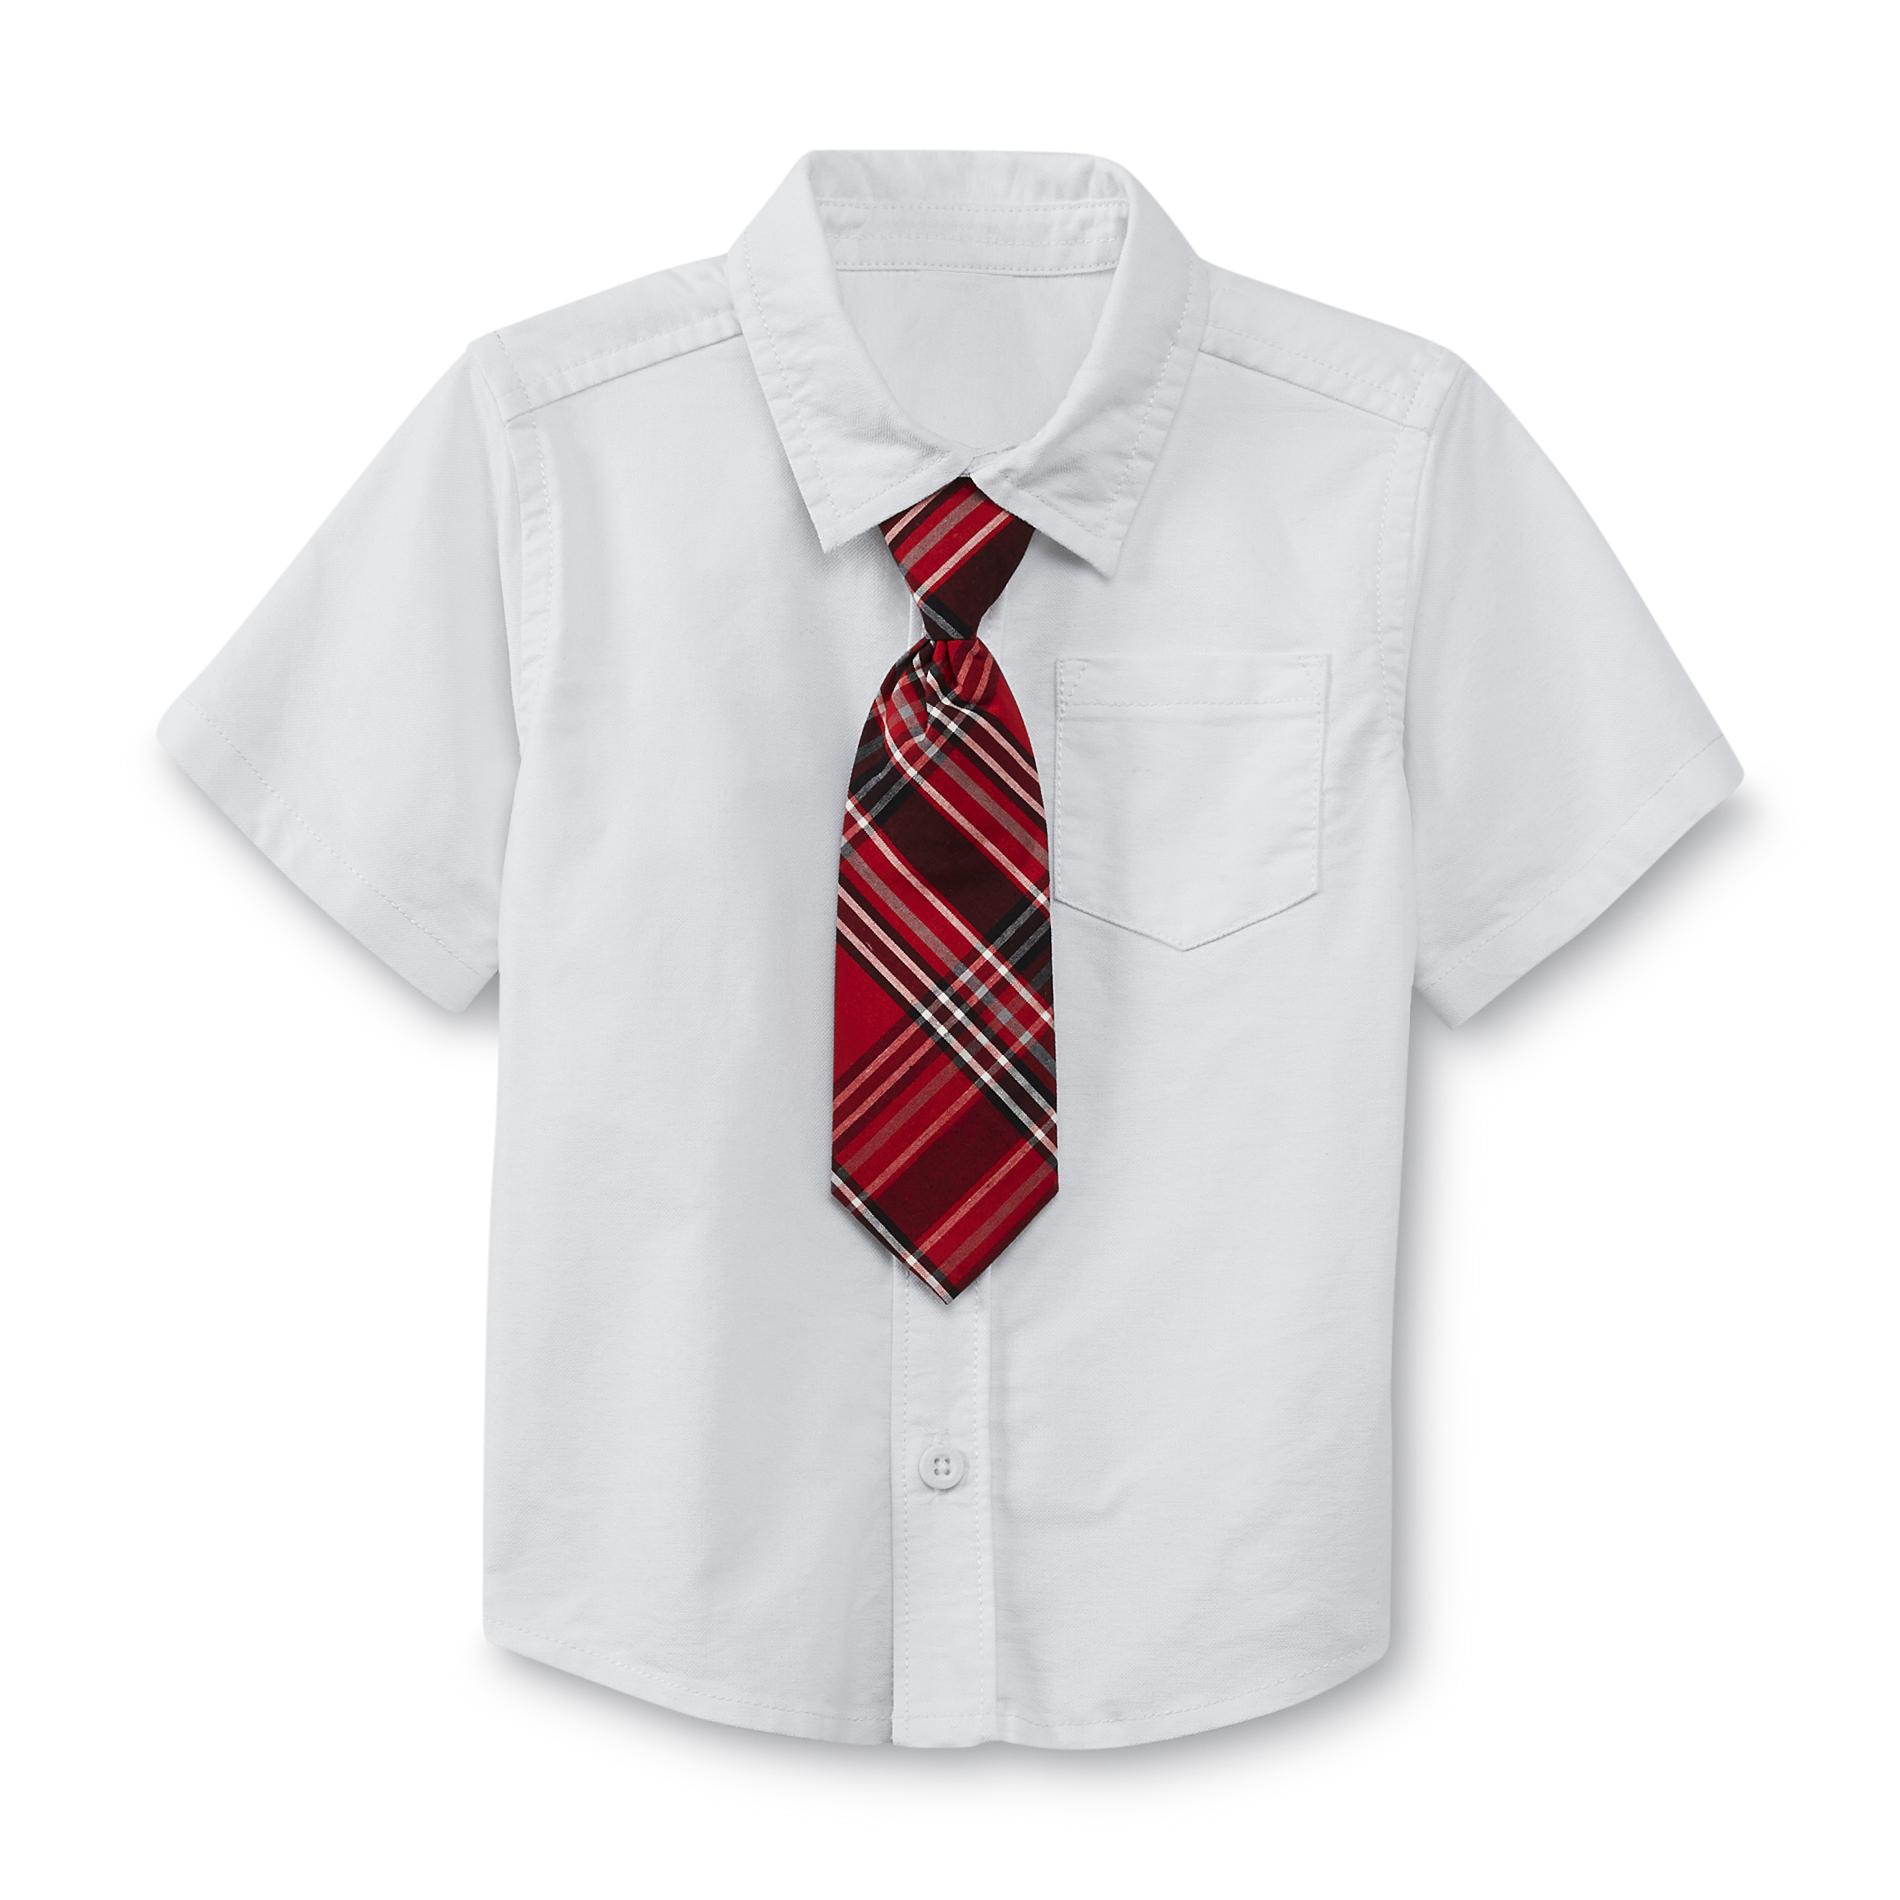 Holiday Editions Infant & Toddler Boy's Short-Sleeve Dress Shirt & Tie - Plaid